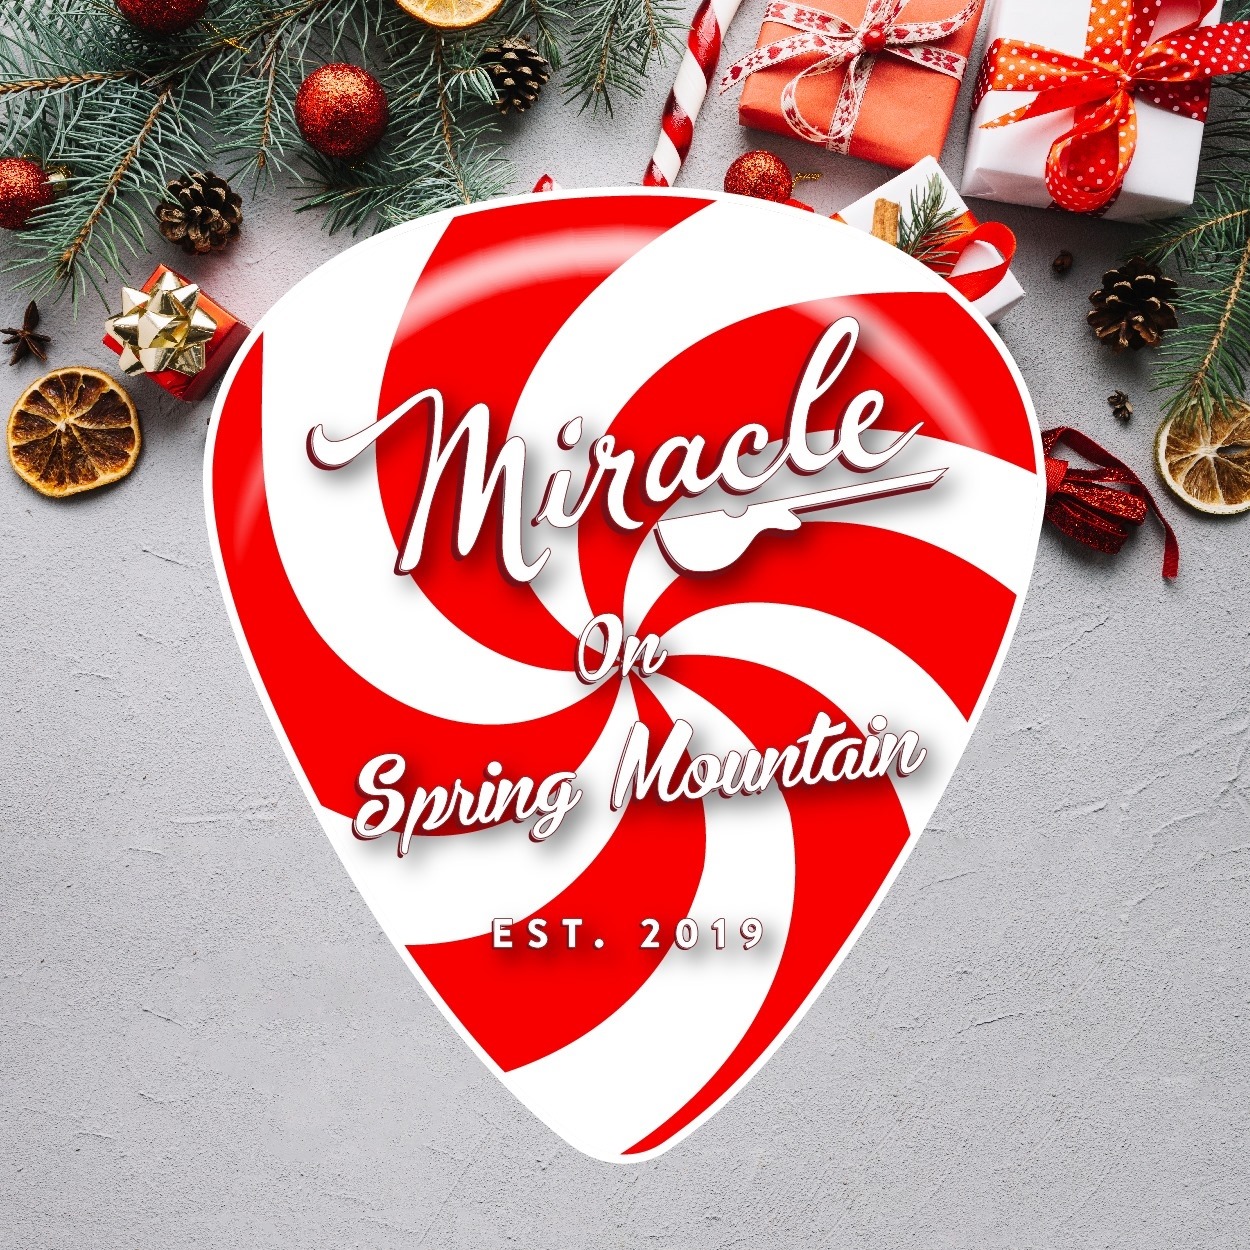 Miracle on Spring Mountain logo, opens Thanksgiving weekend